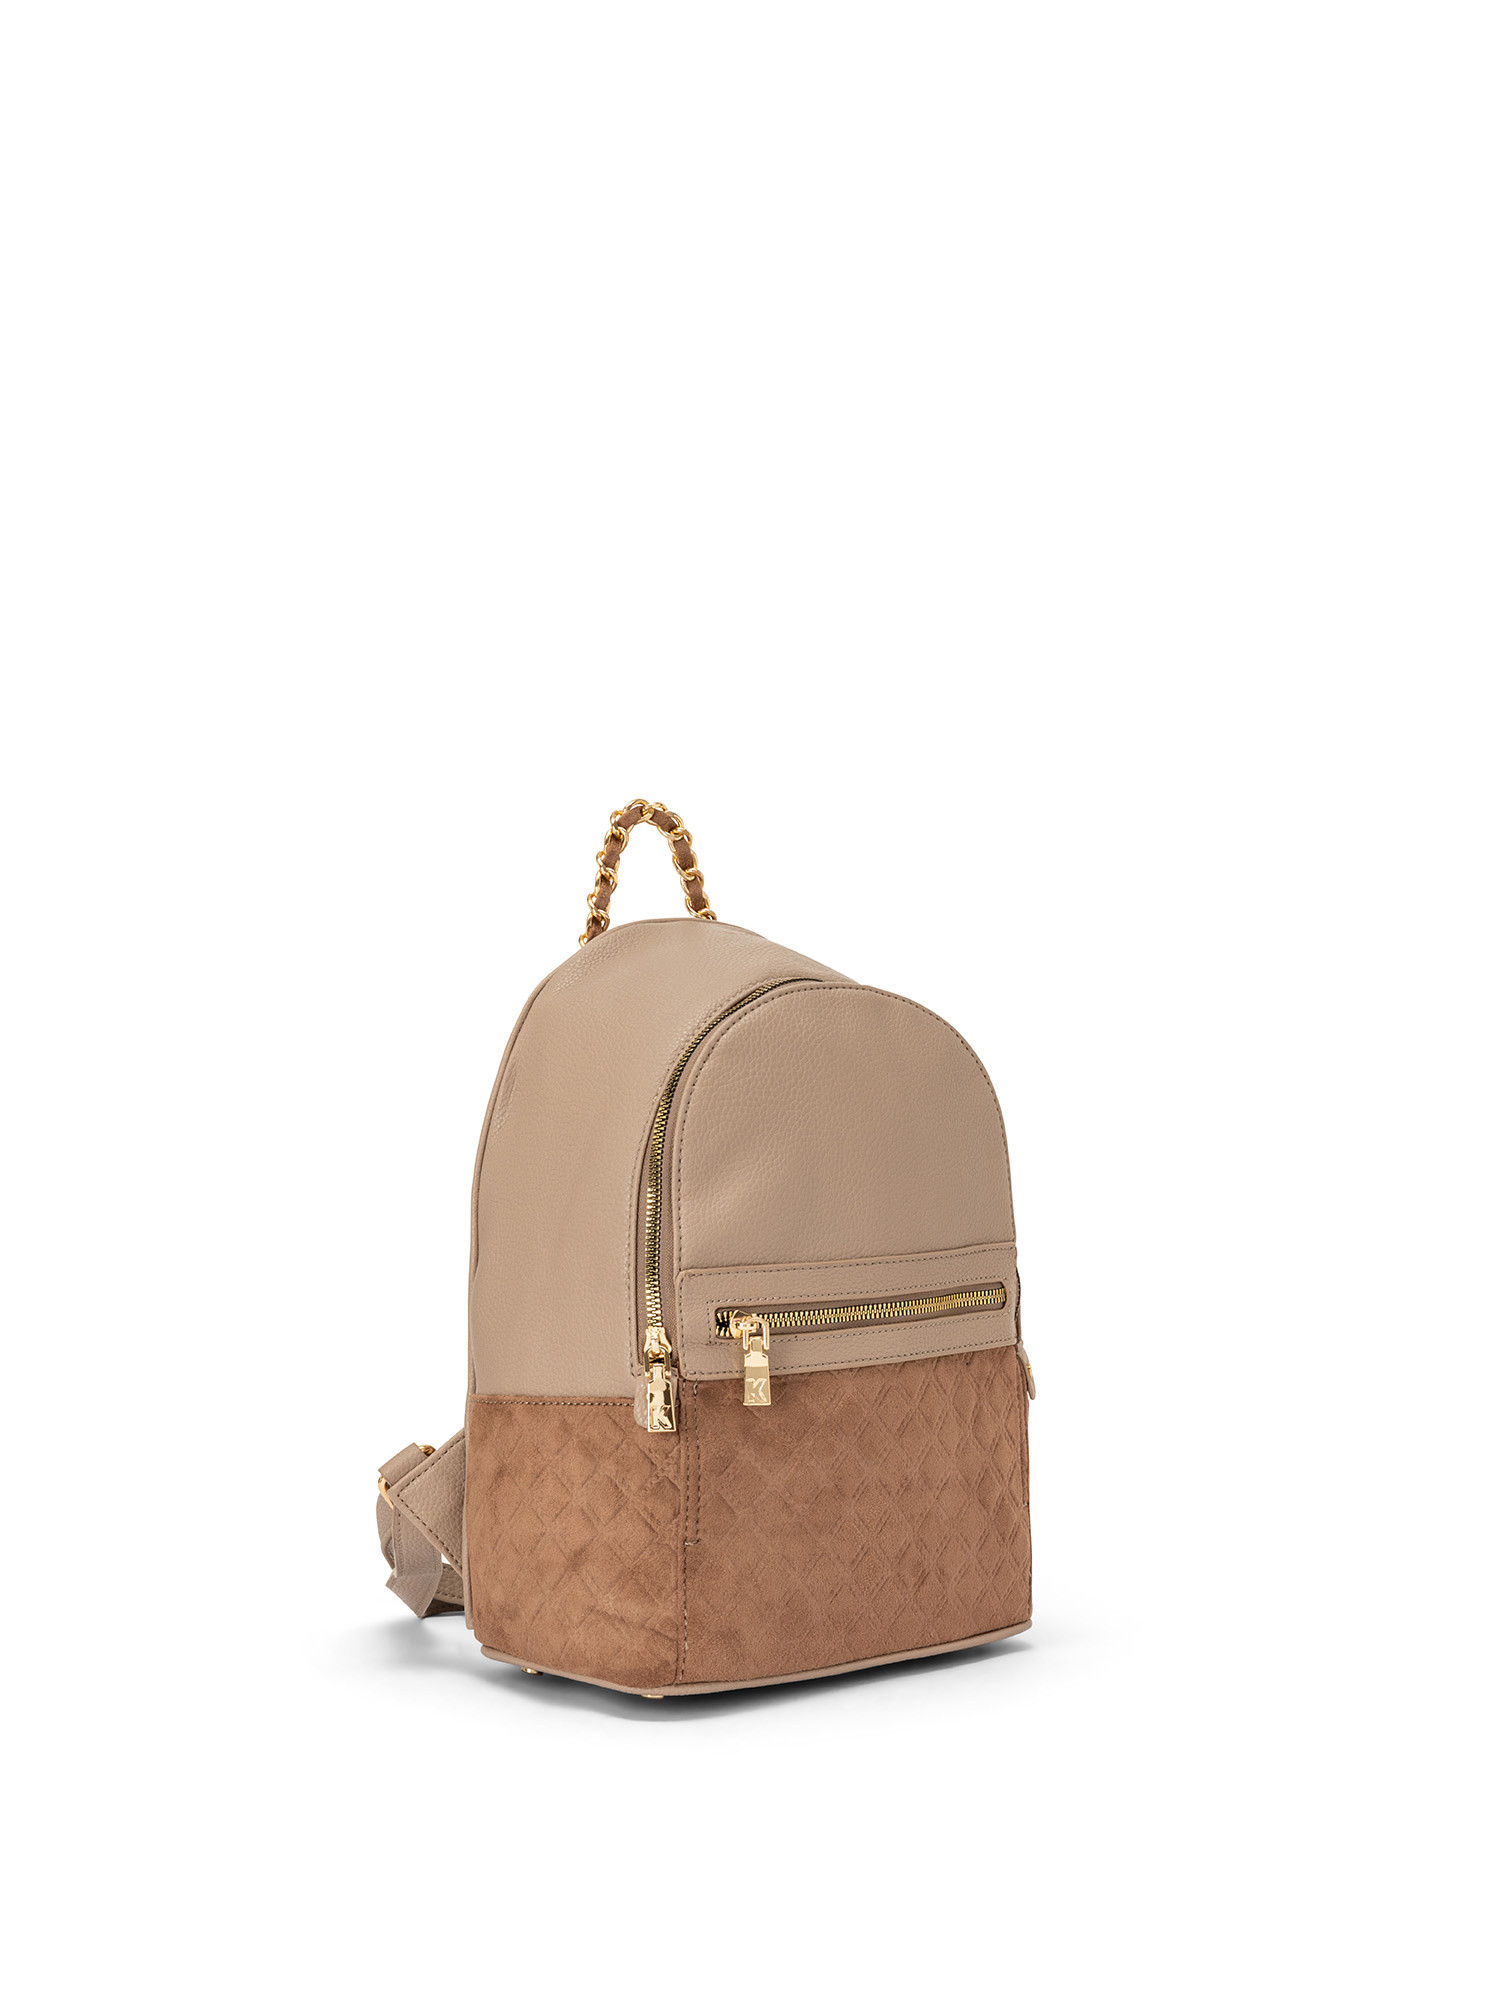 Koan - Backpack with print, Taupe Grey, large image number 1